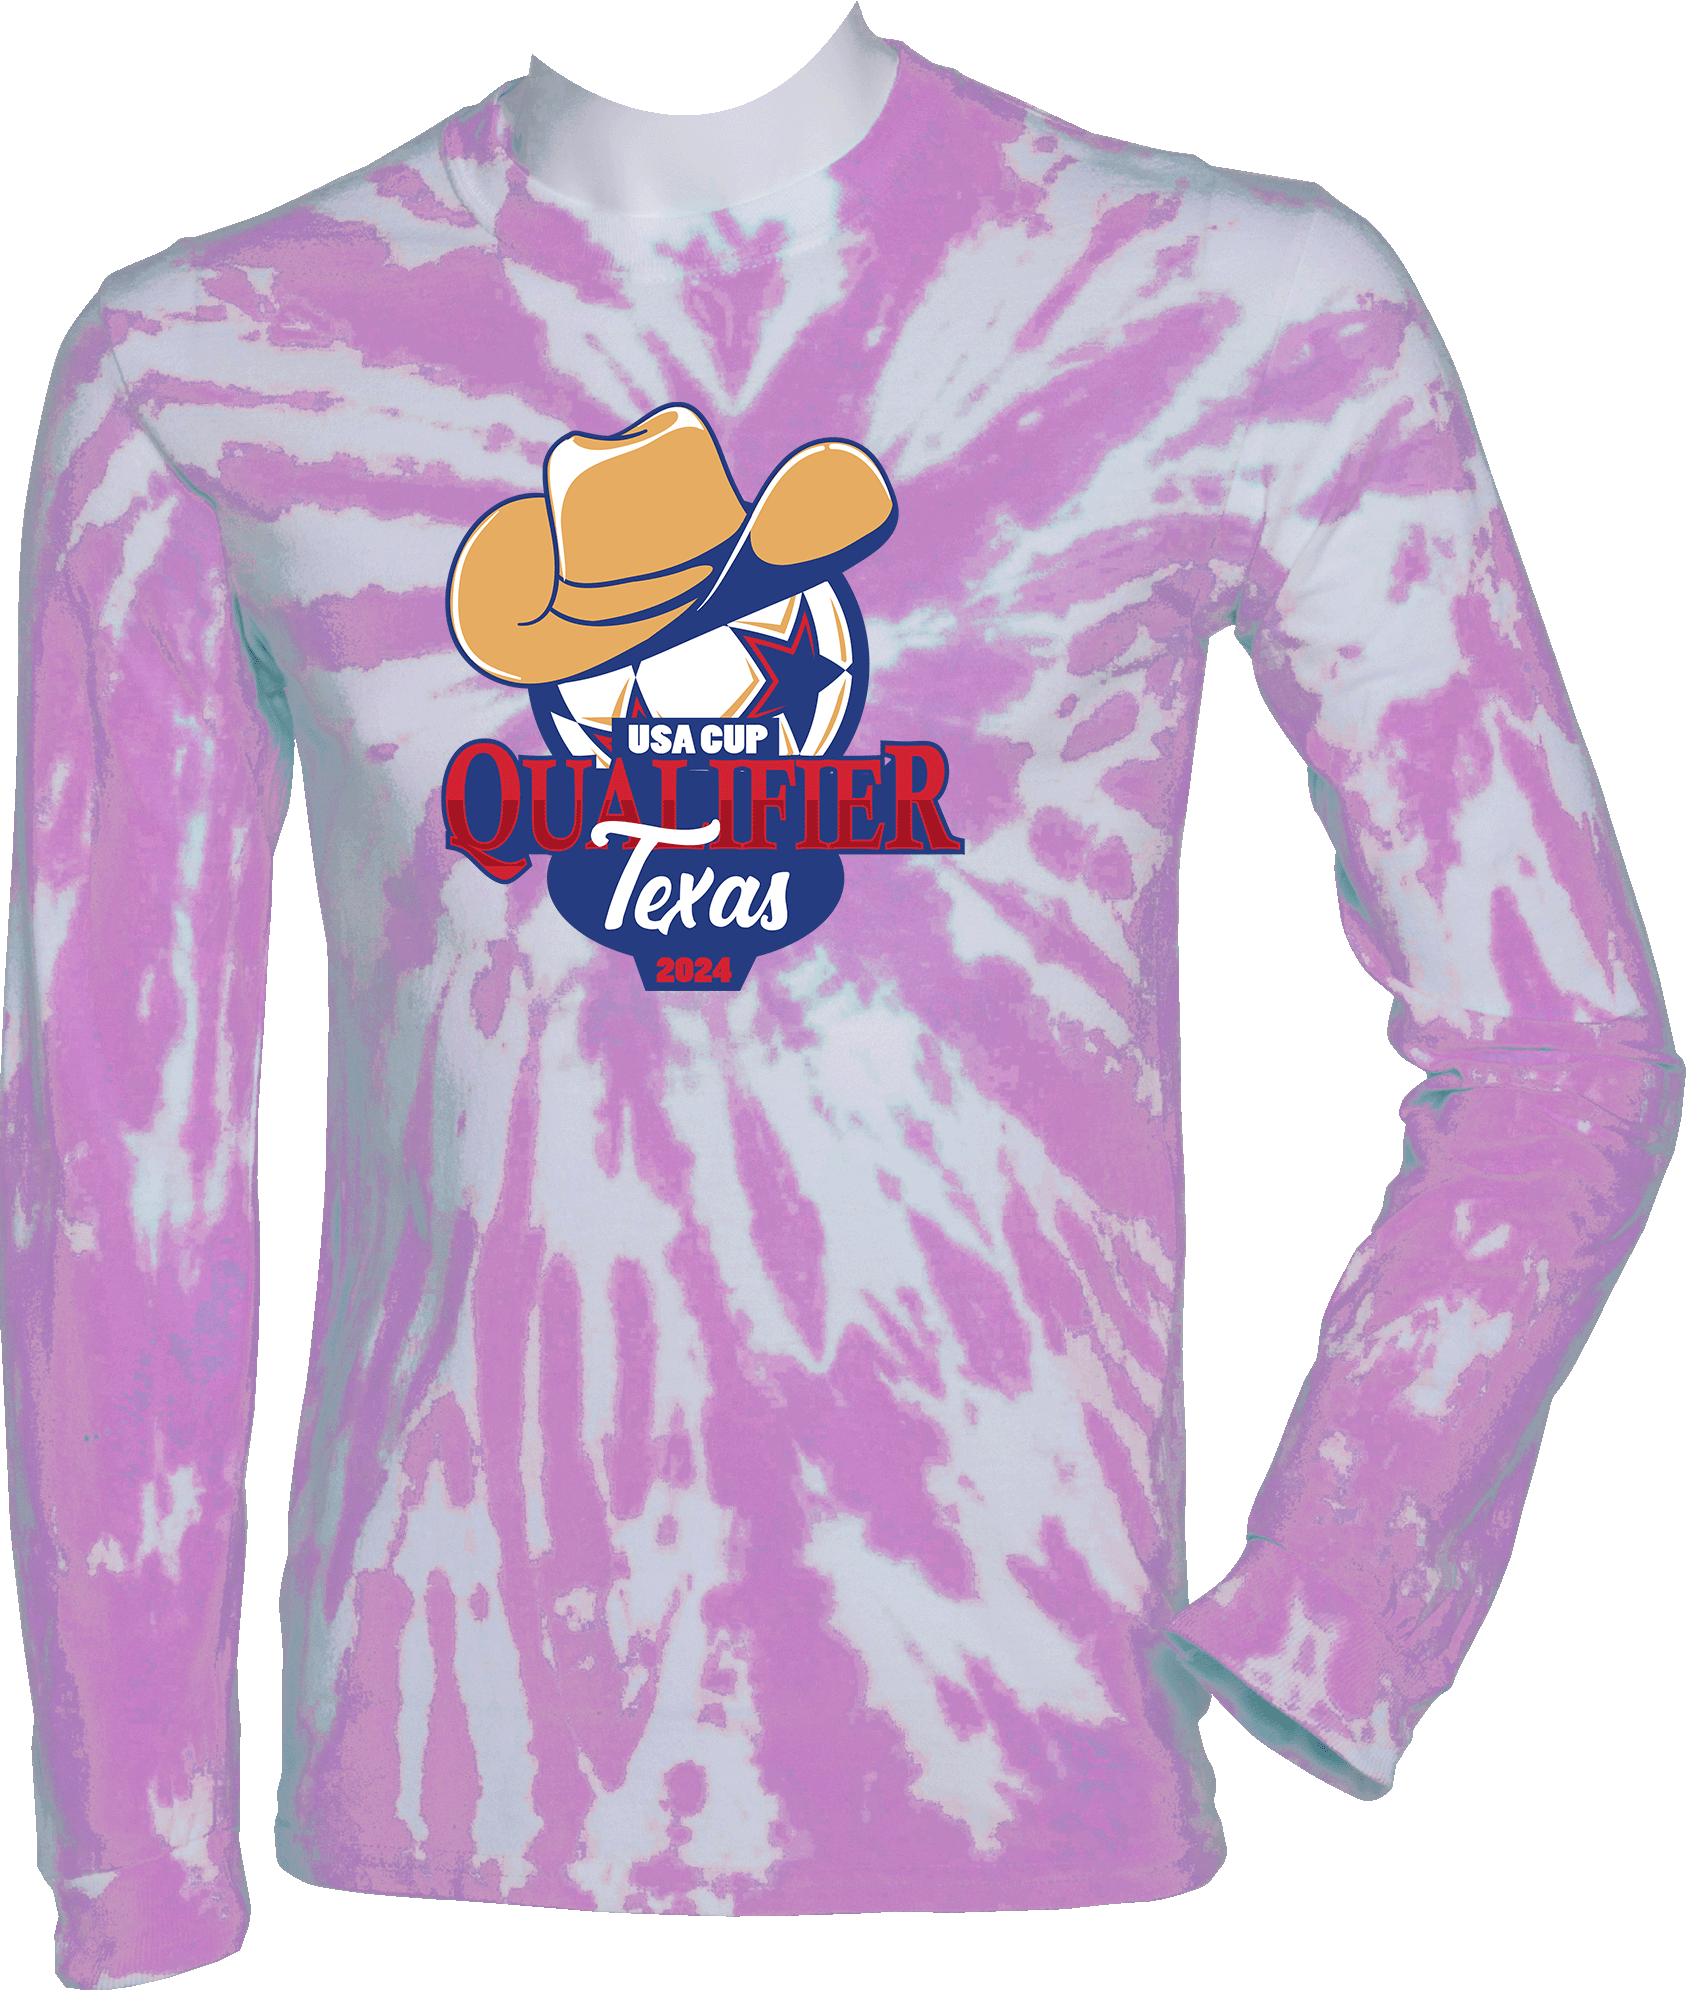 Tie-Dye Long Sleeves - 2024 USA CUP Qualifier Texas